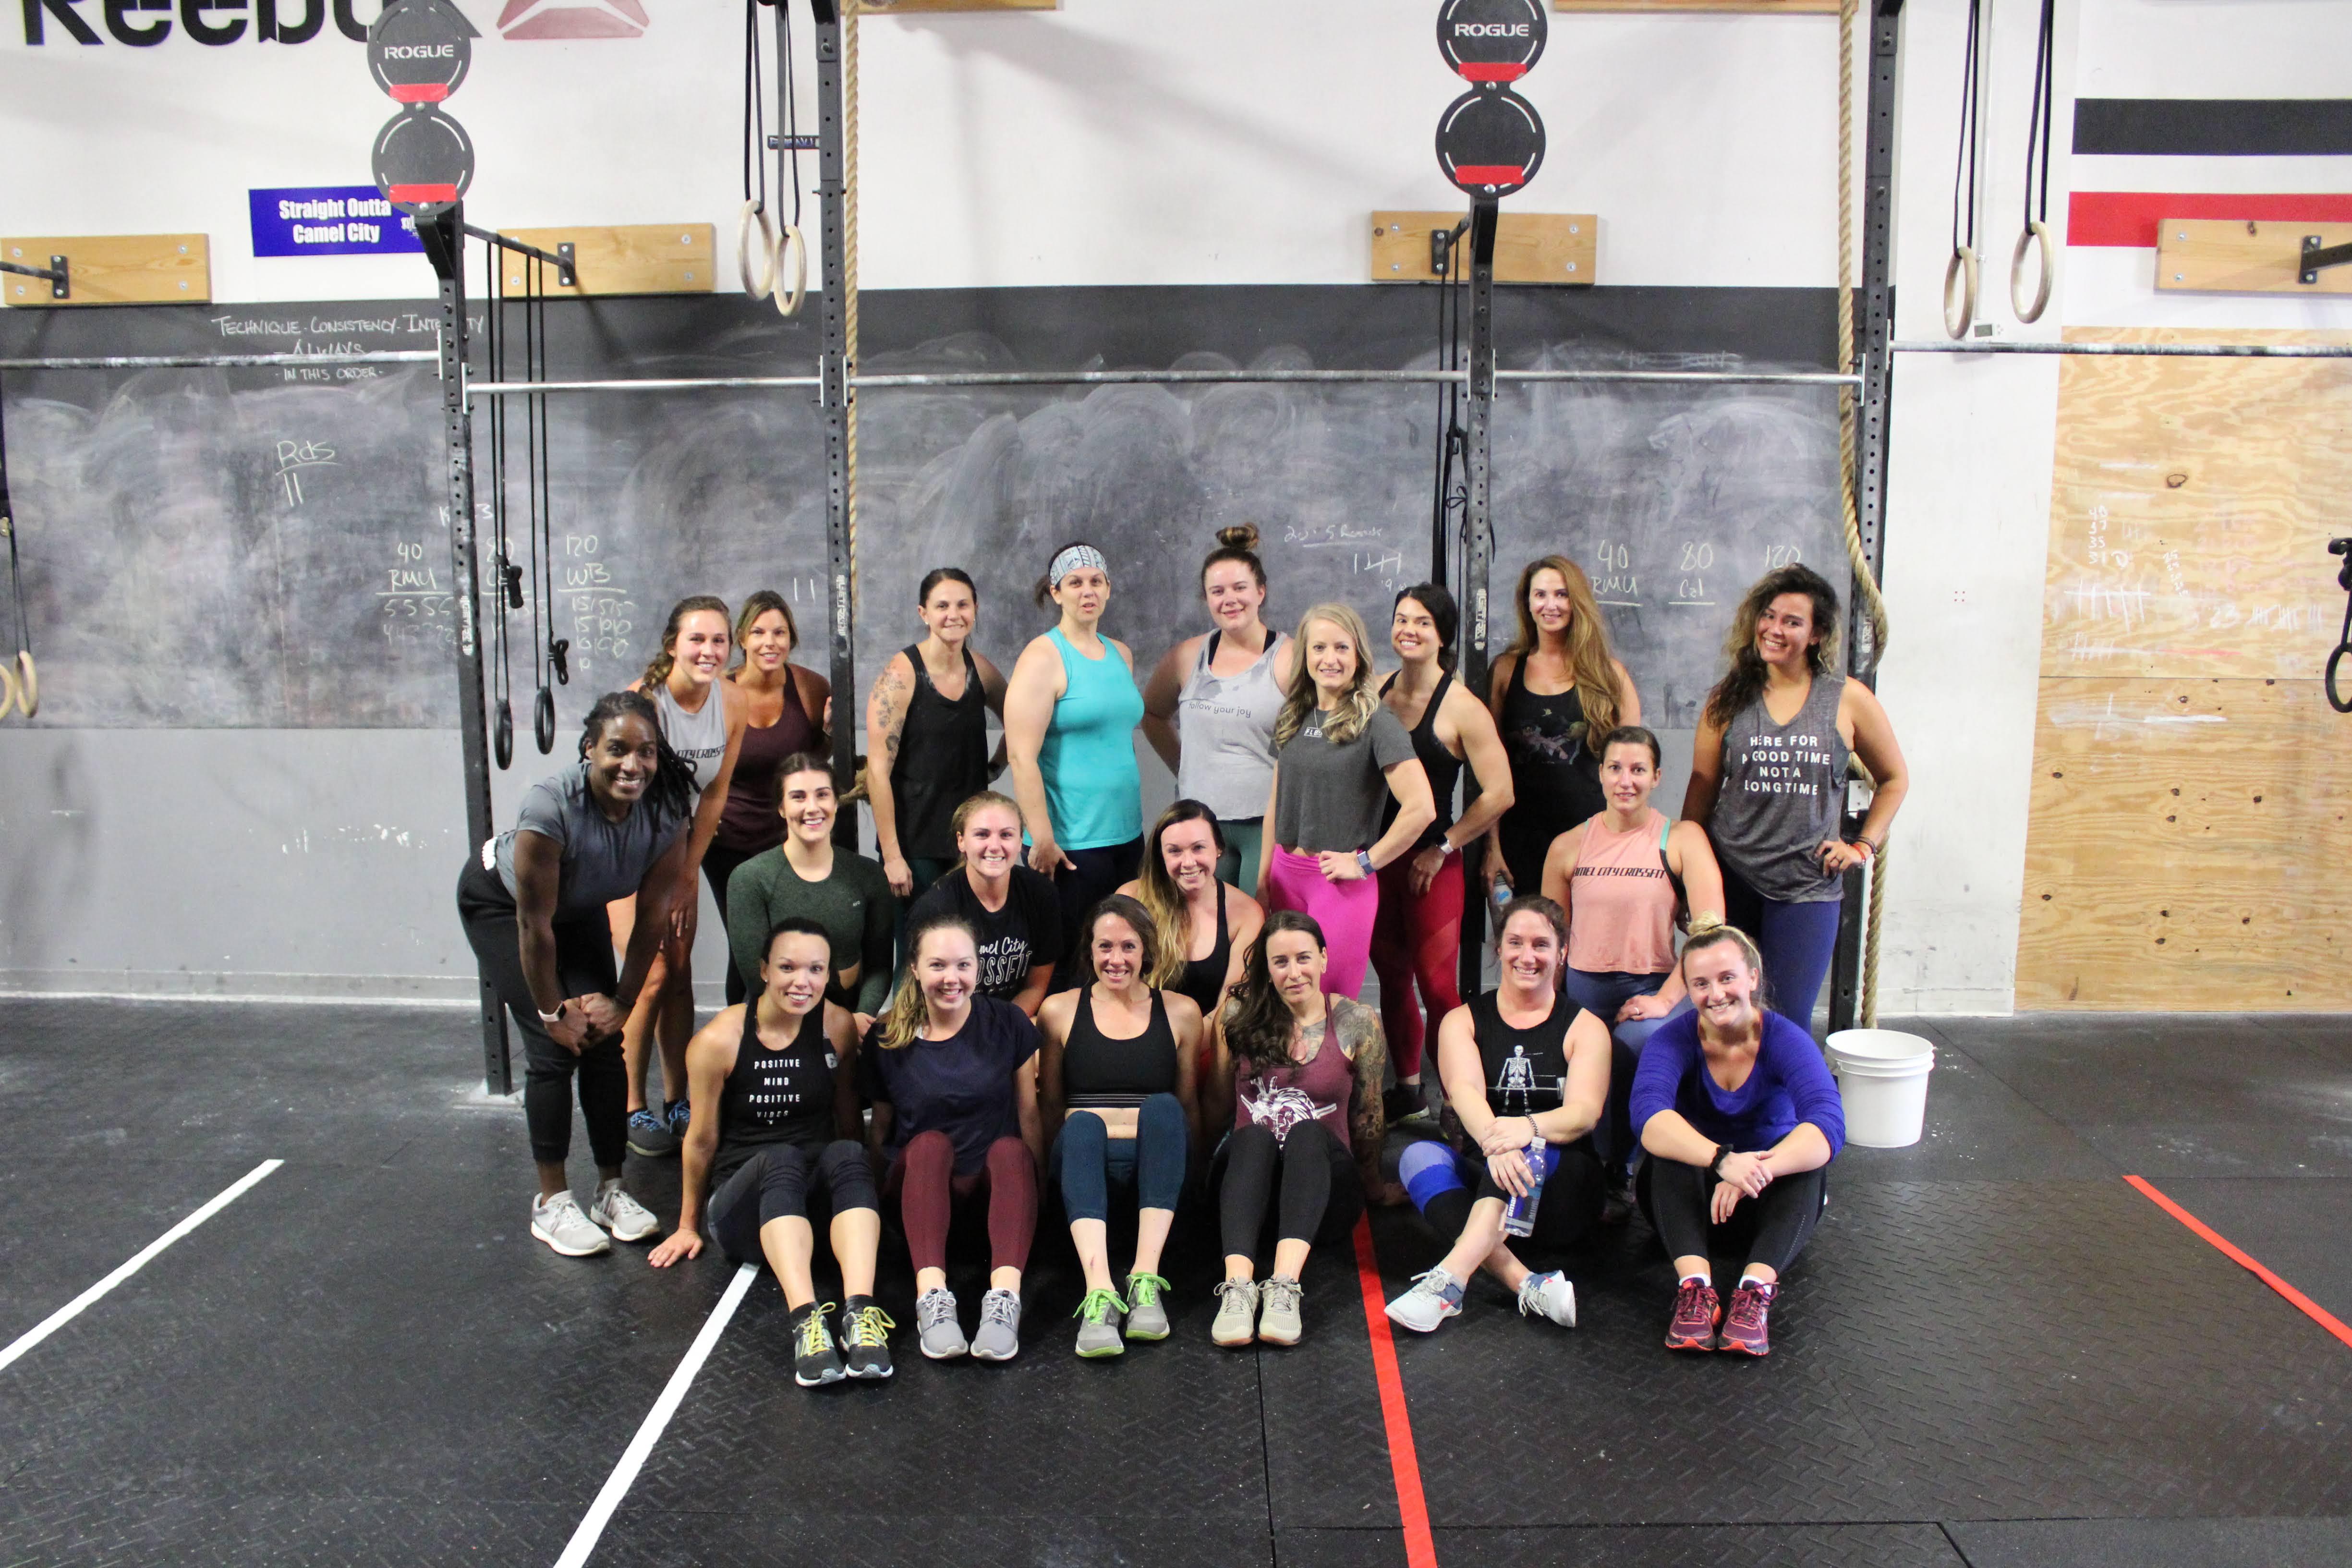 Women's Only Workout - #WOW3!